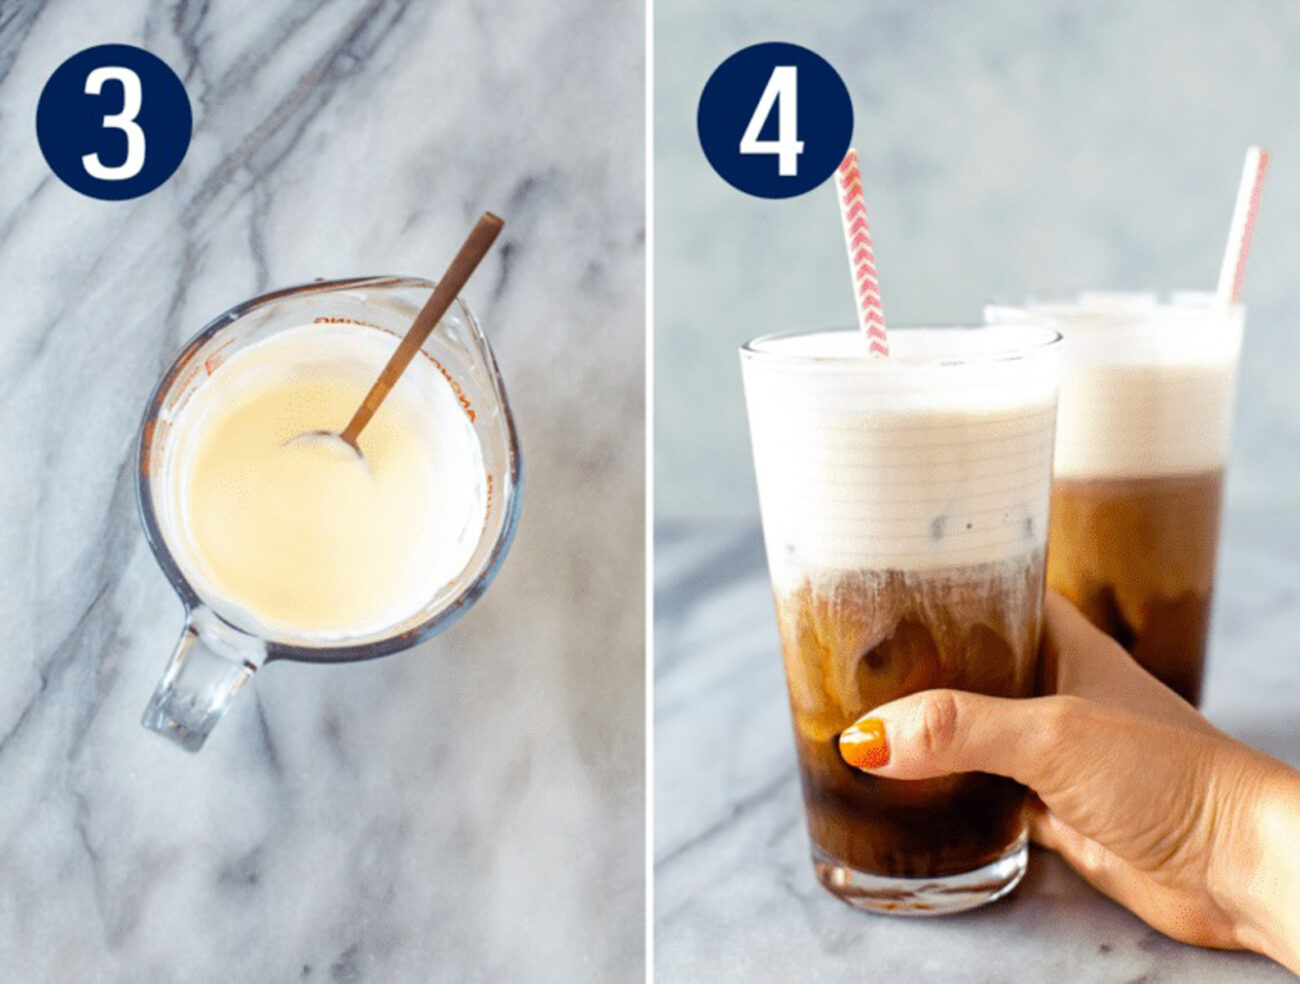 Steps 3 and 4 for making salted caramel cream cold brew: Make salted cold foam then assemble your drink and serve.